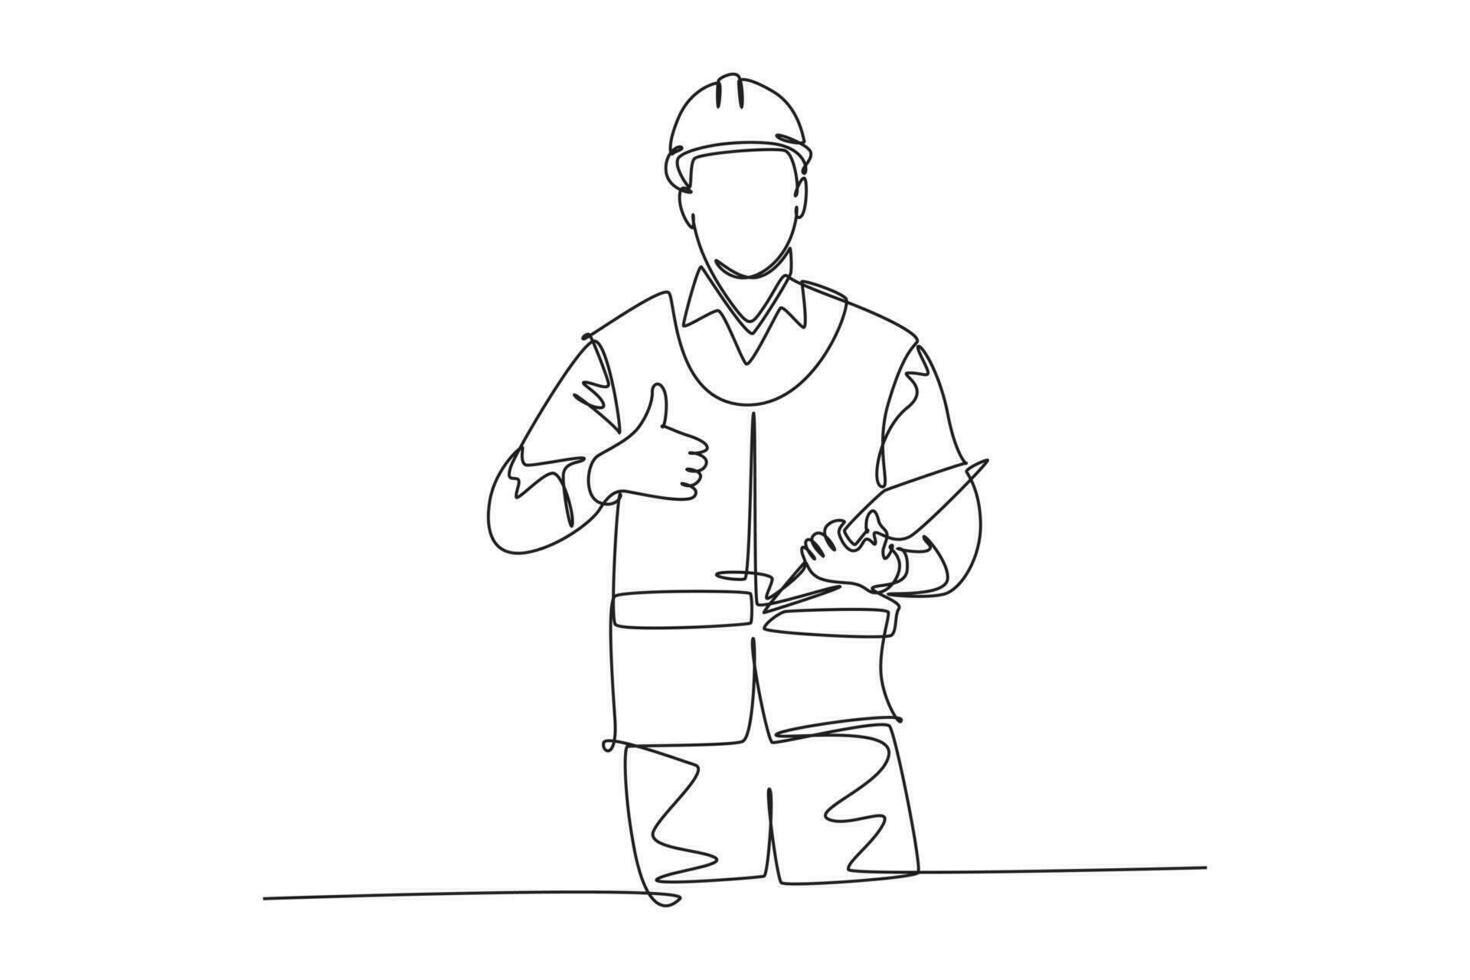 Continuous one line drawing young foreman handyman wearing helmet and carrying clipboard giving thumbs up gesture. Home maintenance service concept. Single line draw design vector graphic illustration